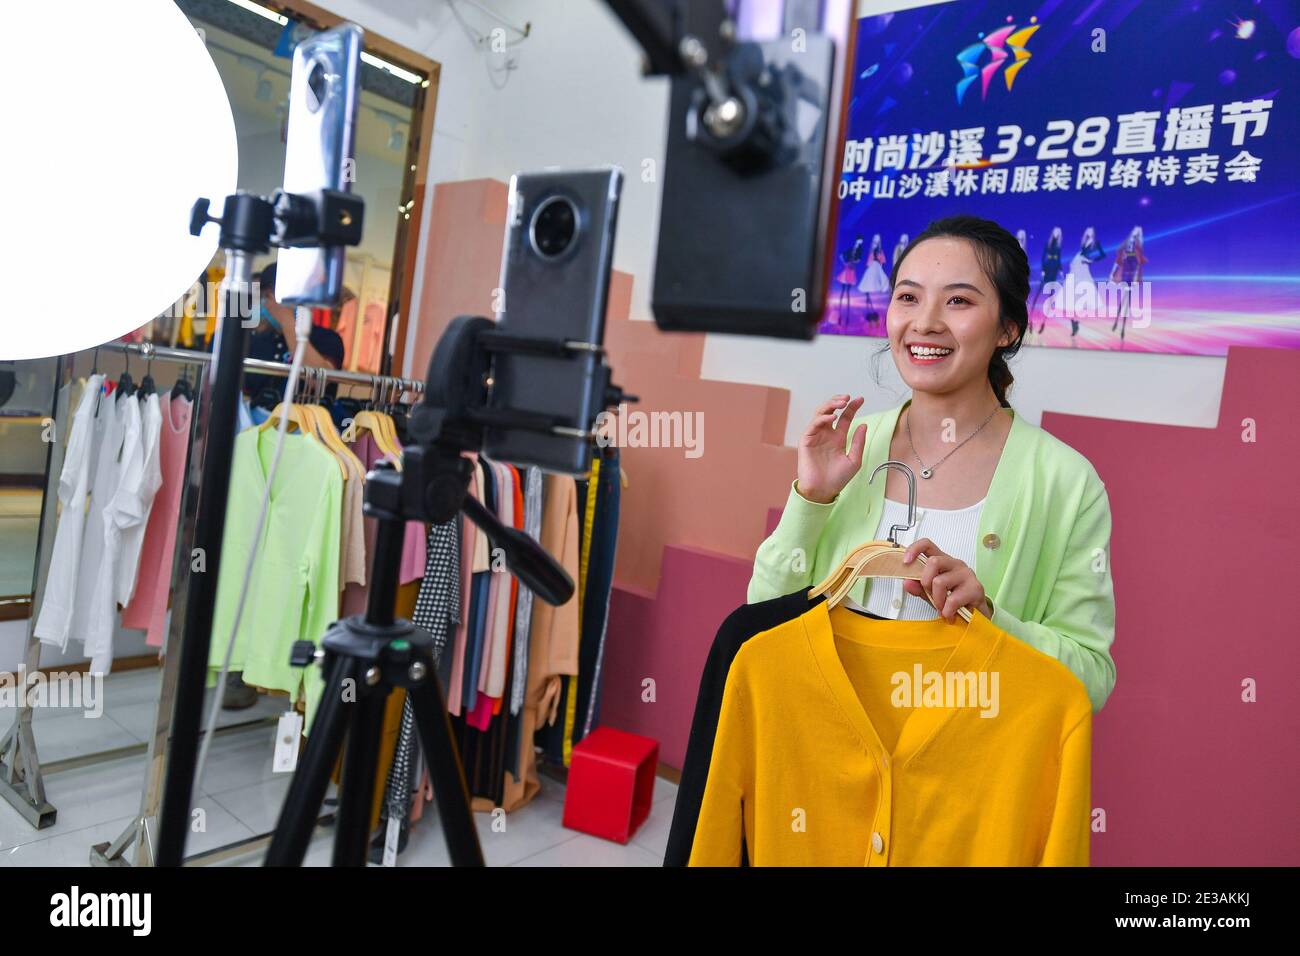 Beijing, China's Guangdong Province. 28th Mar, 2020. A woman sells clothes in front of phone cameras via livestreaming on an e-commerce platform in Shaxi Town in Zhongshan City, south China's Guangdong Province, March 28, 2020. China's gross domestic product (GDP) exceeded the 100-trillion-yuan (15.42 trillion U.S. dollars) threshold as it posted a 2.3 percent year-on-year expansion to 101.5986 trillion yuan in 2020, data from the National Bureau of Statistics showed Monday. Credit: Liu Dawei/Xinhua/Alamy Live News Stock Photo